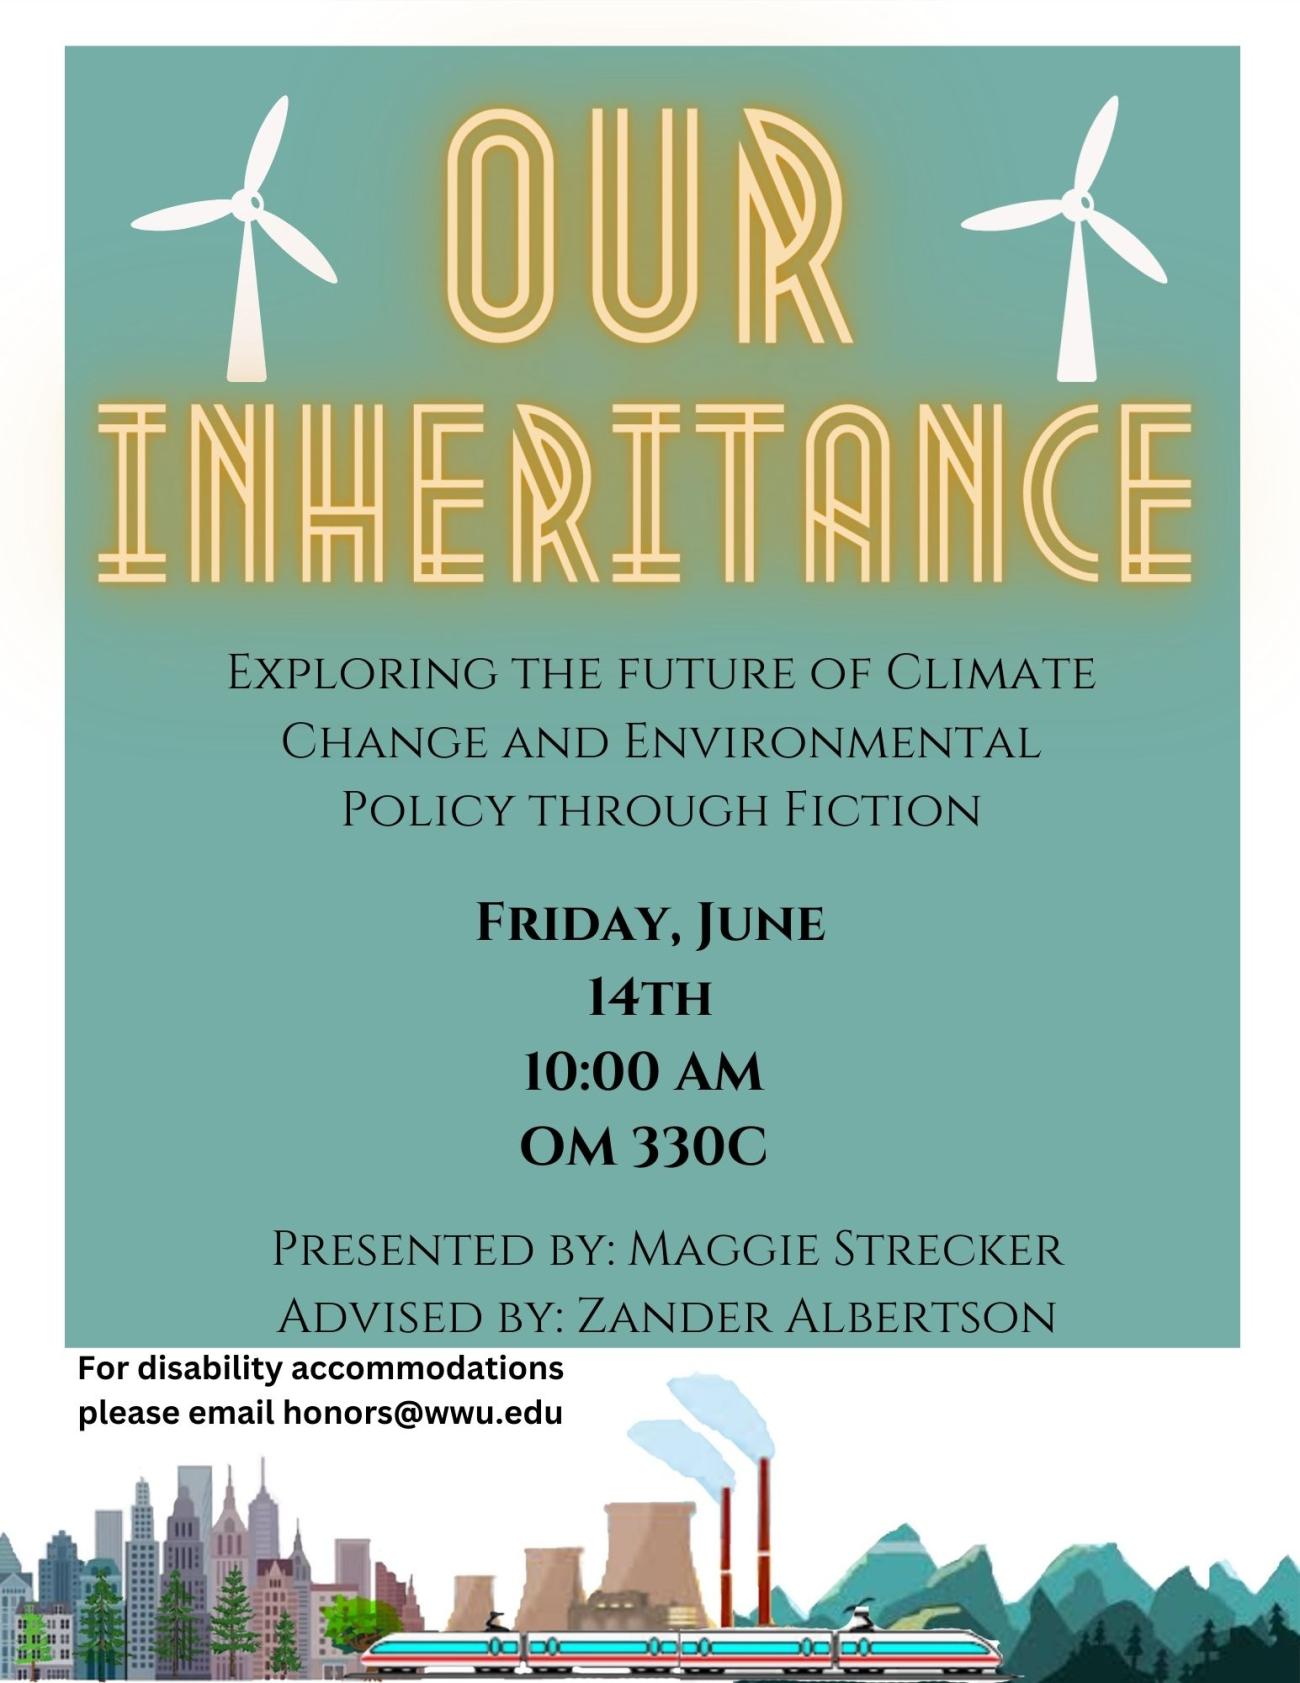 A teal and white poster with wind turbines, a city, a nuclear power-plant, mountains, and a train at the bottom. Text reads “Our Inheritance Exploring the Future of Climate Change and Environmental Policy through Fiction. Friday, June 14th 10:00 AM OM330C. Presented By: Maggie Strecker Advised By: Zander Albertson. For disability accommodations please email honors@wwu.edu”